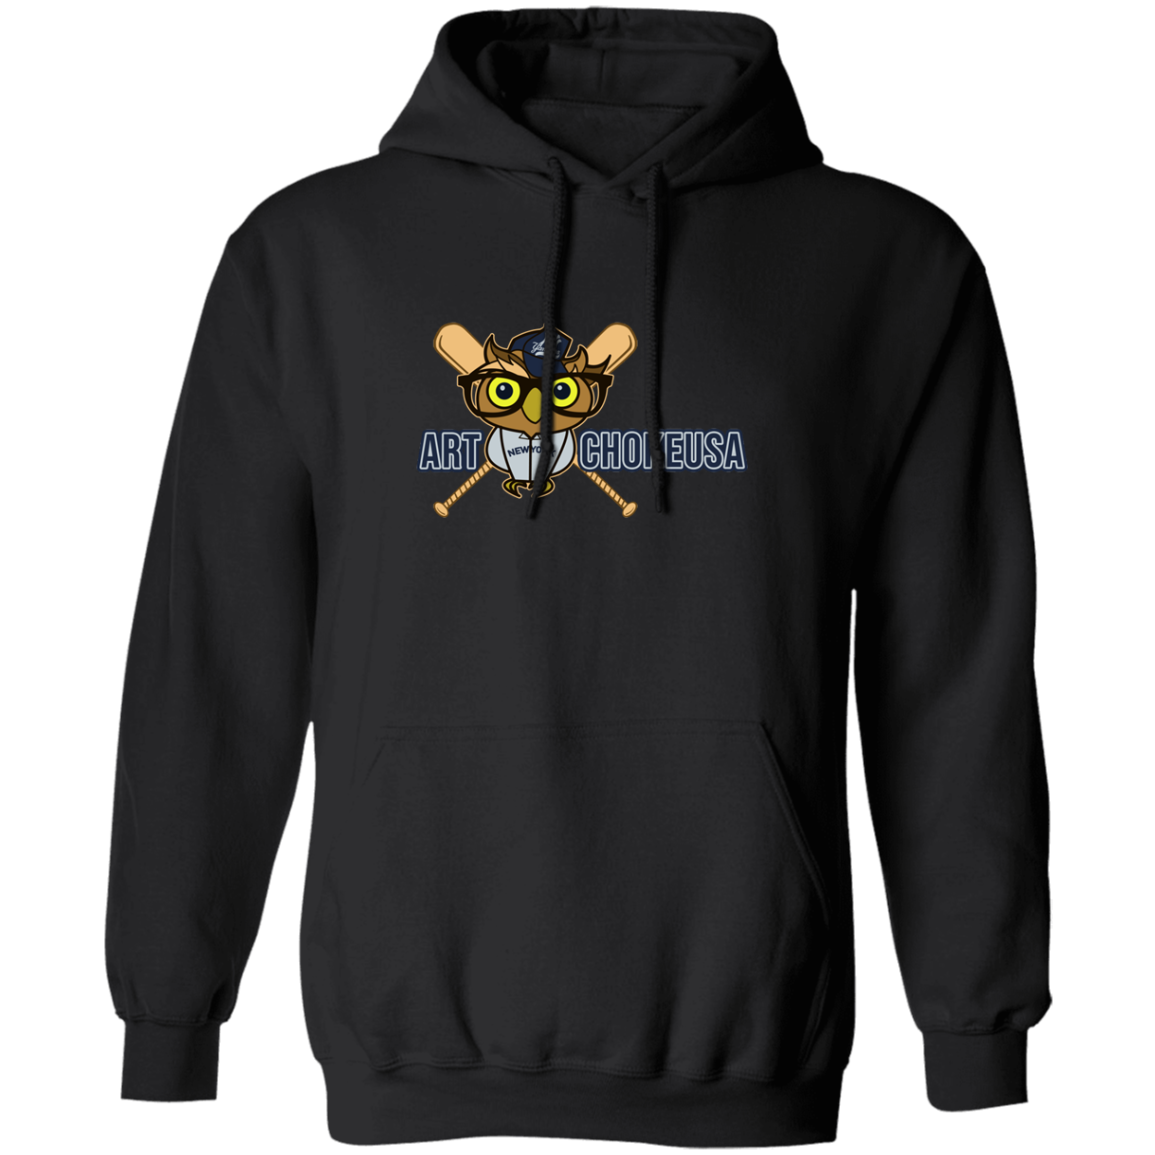 ArtichokeUSA Character and Font design. New York Owl. NY Yankees Fan Art. Let's Create Your Own Team Design Today. Basic Pullover Hoodie